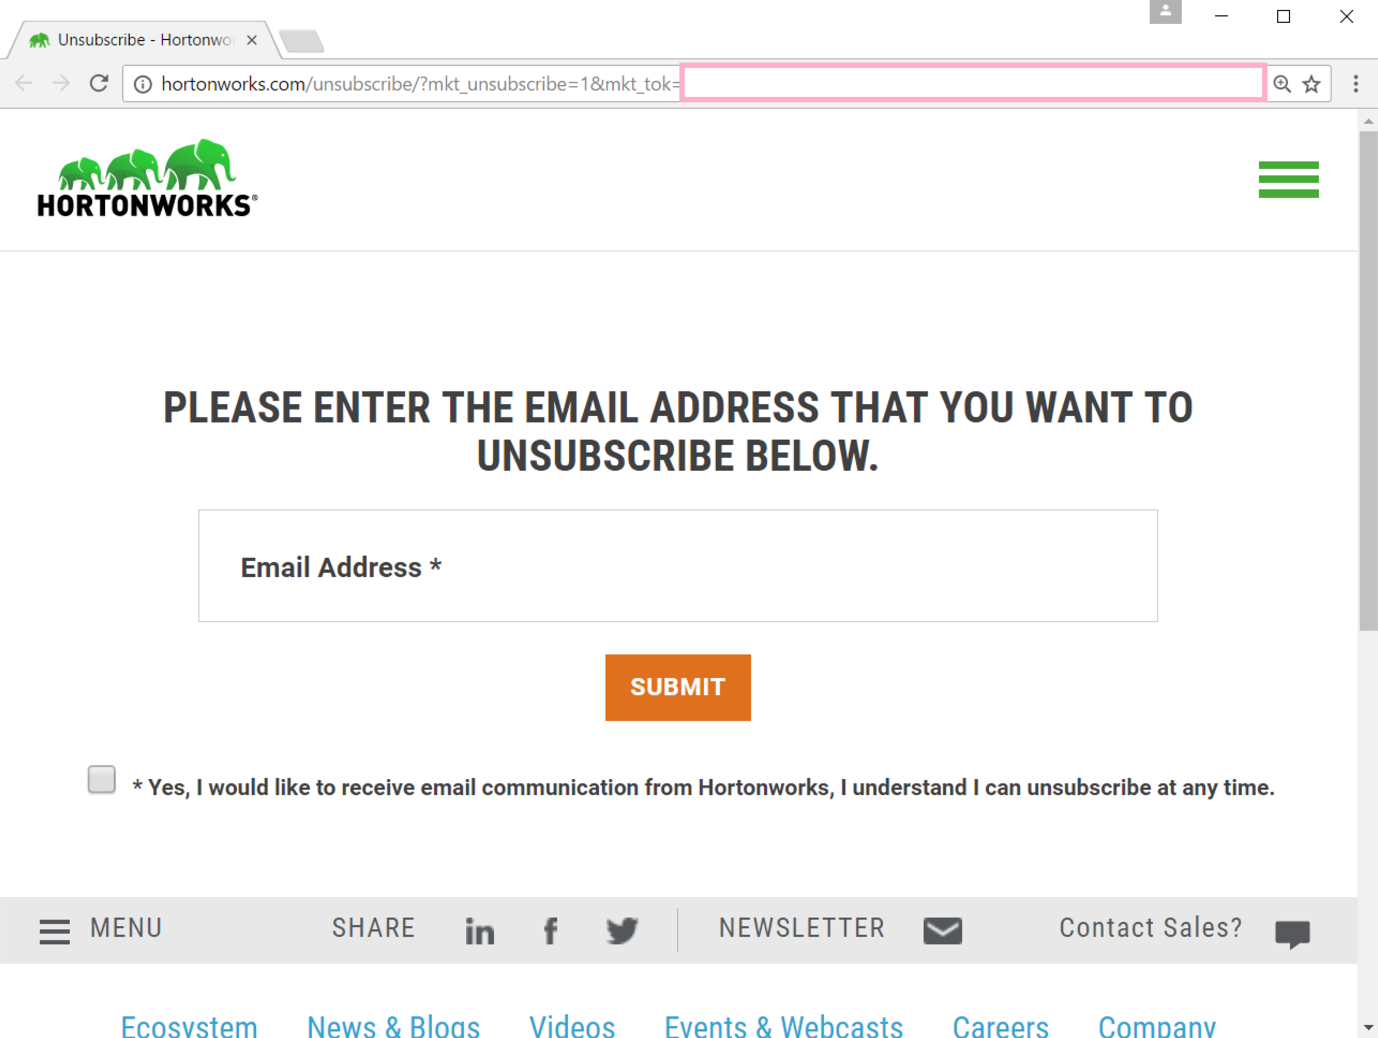 HortonWorks requires people to enter their email and re-click a box to unsubscribe.